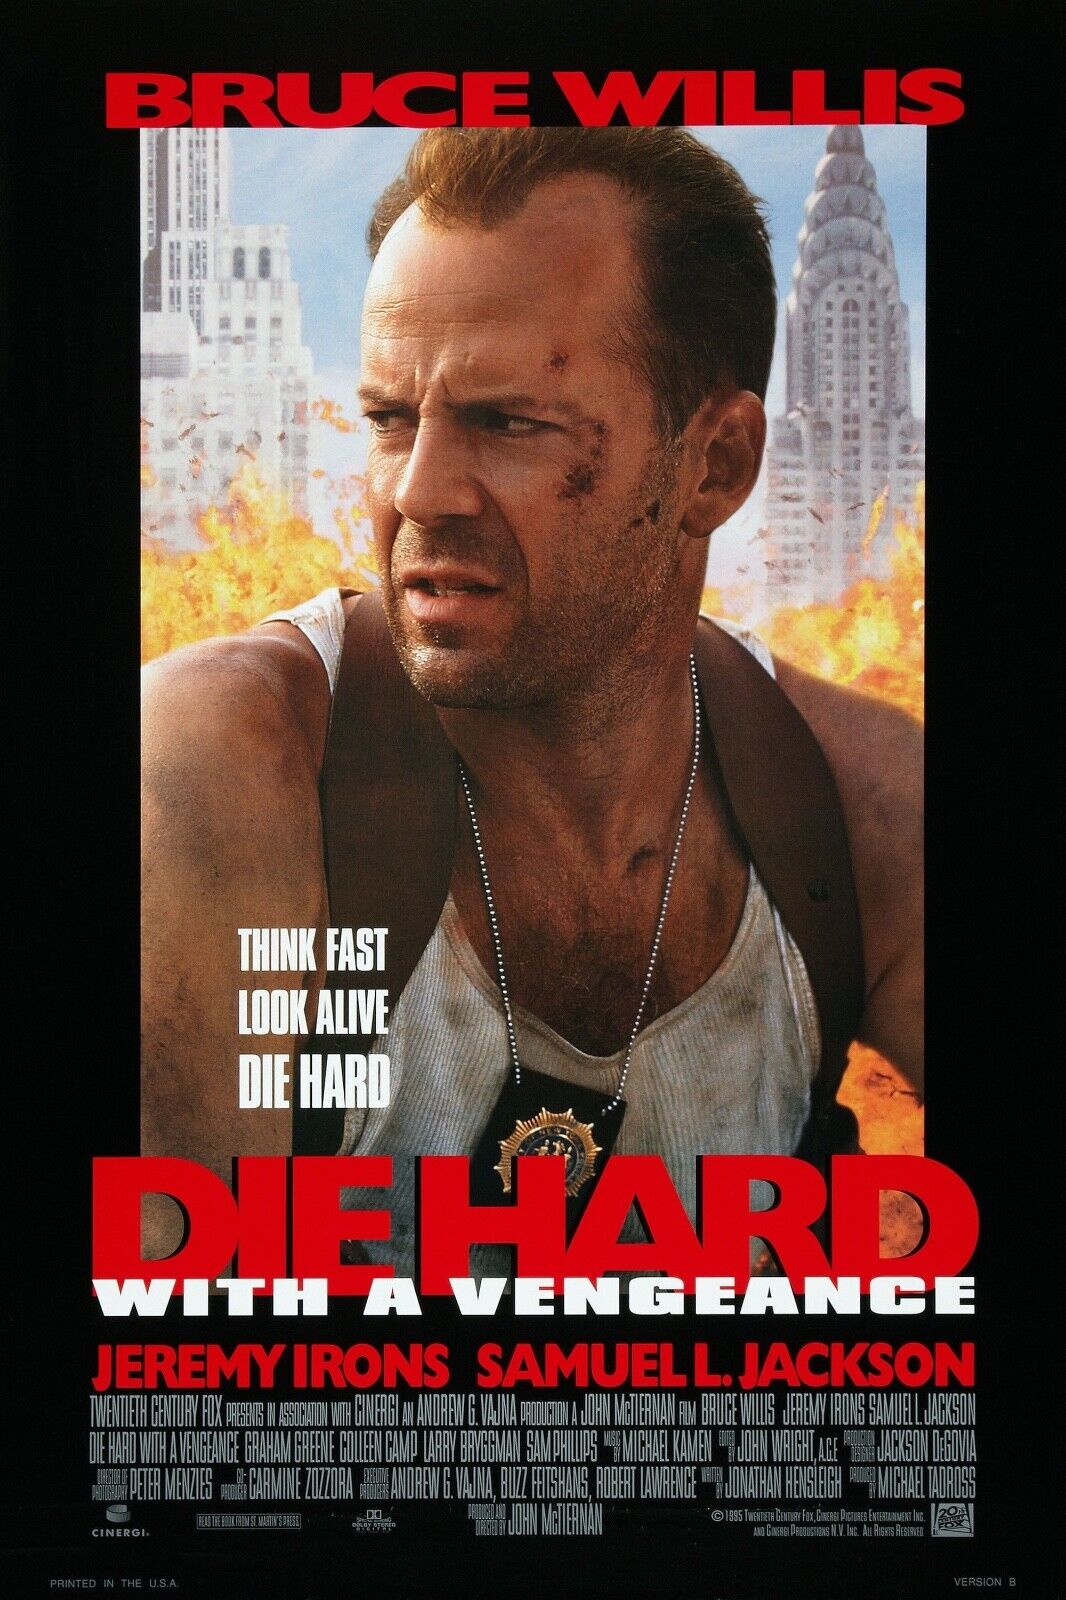 1995 Promo Poster Print "Die Hard with a Vengeance" Wall Decor Film Bruce Willis Без бренда